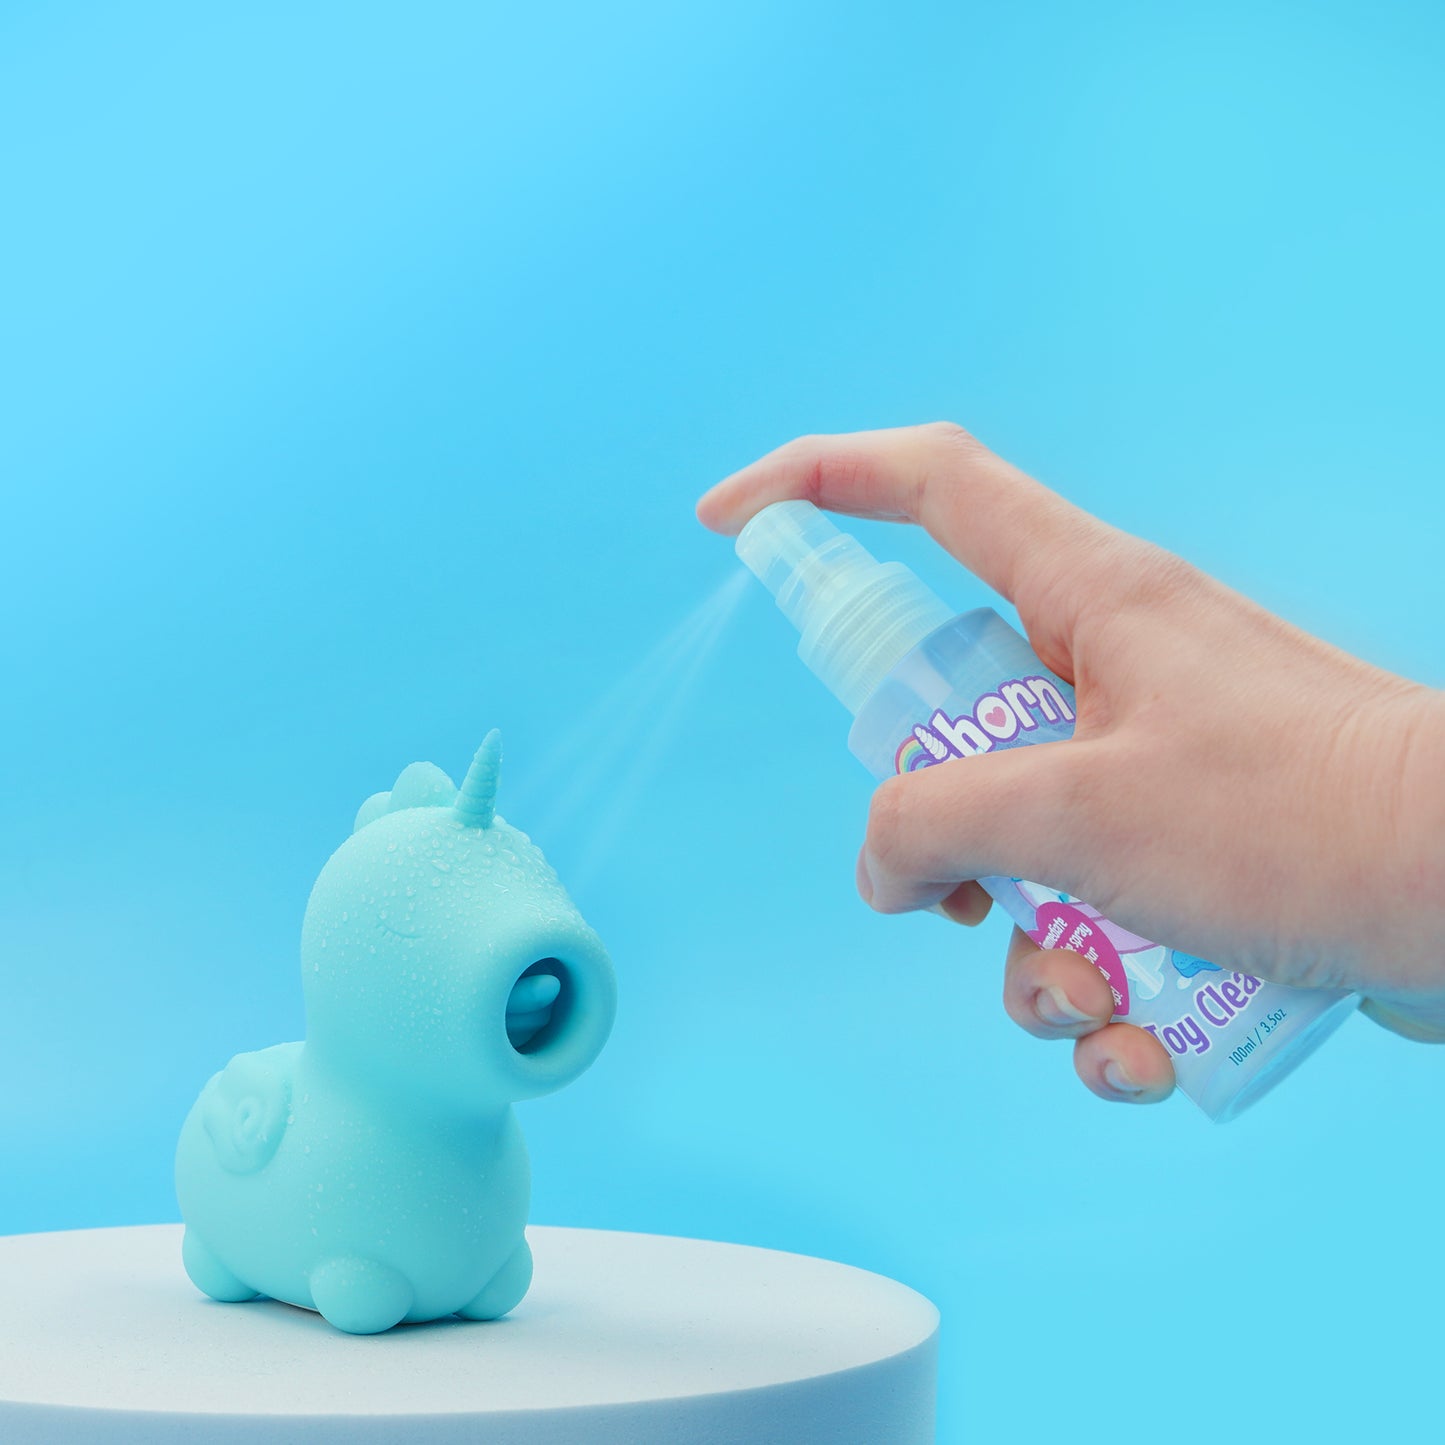 Unihorn® - Toy Cleaner